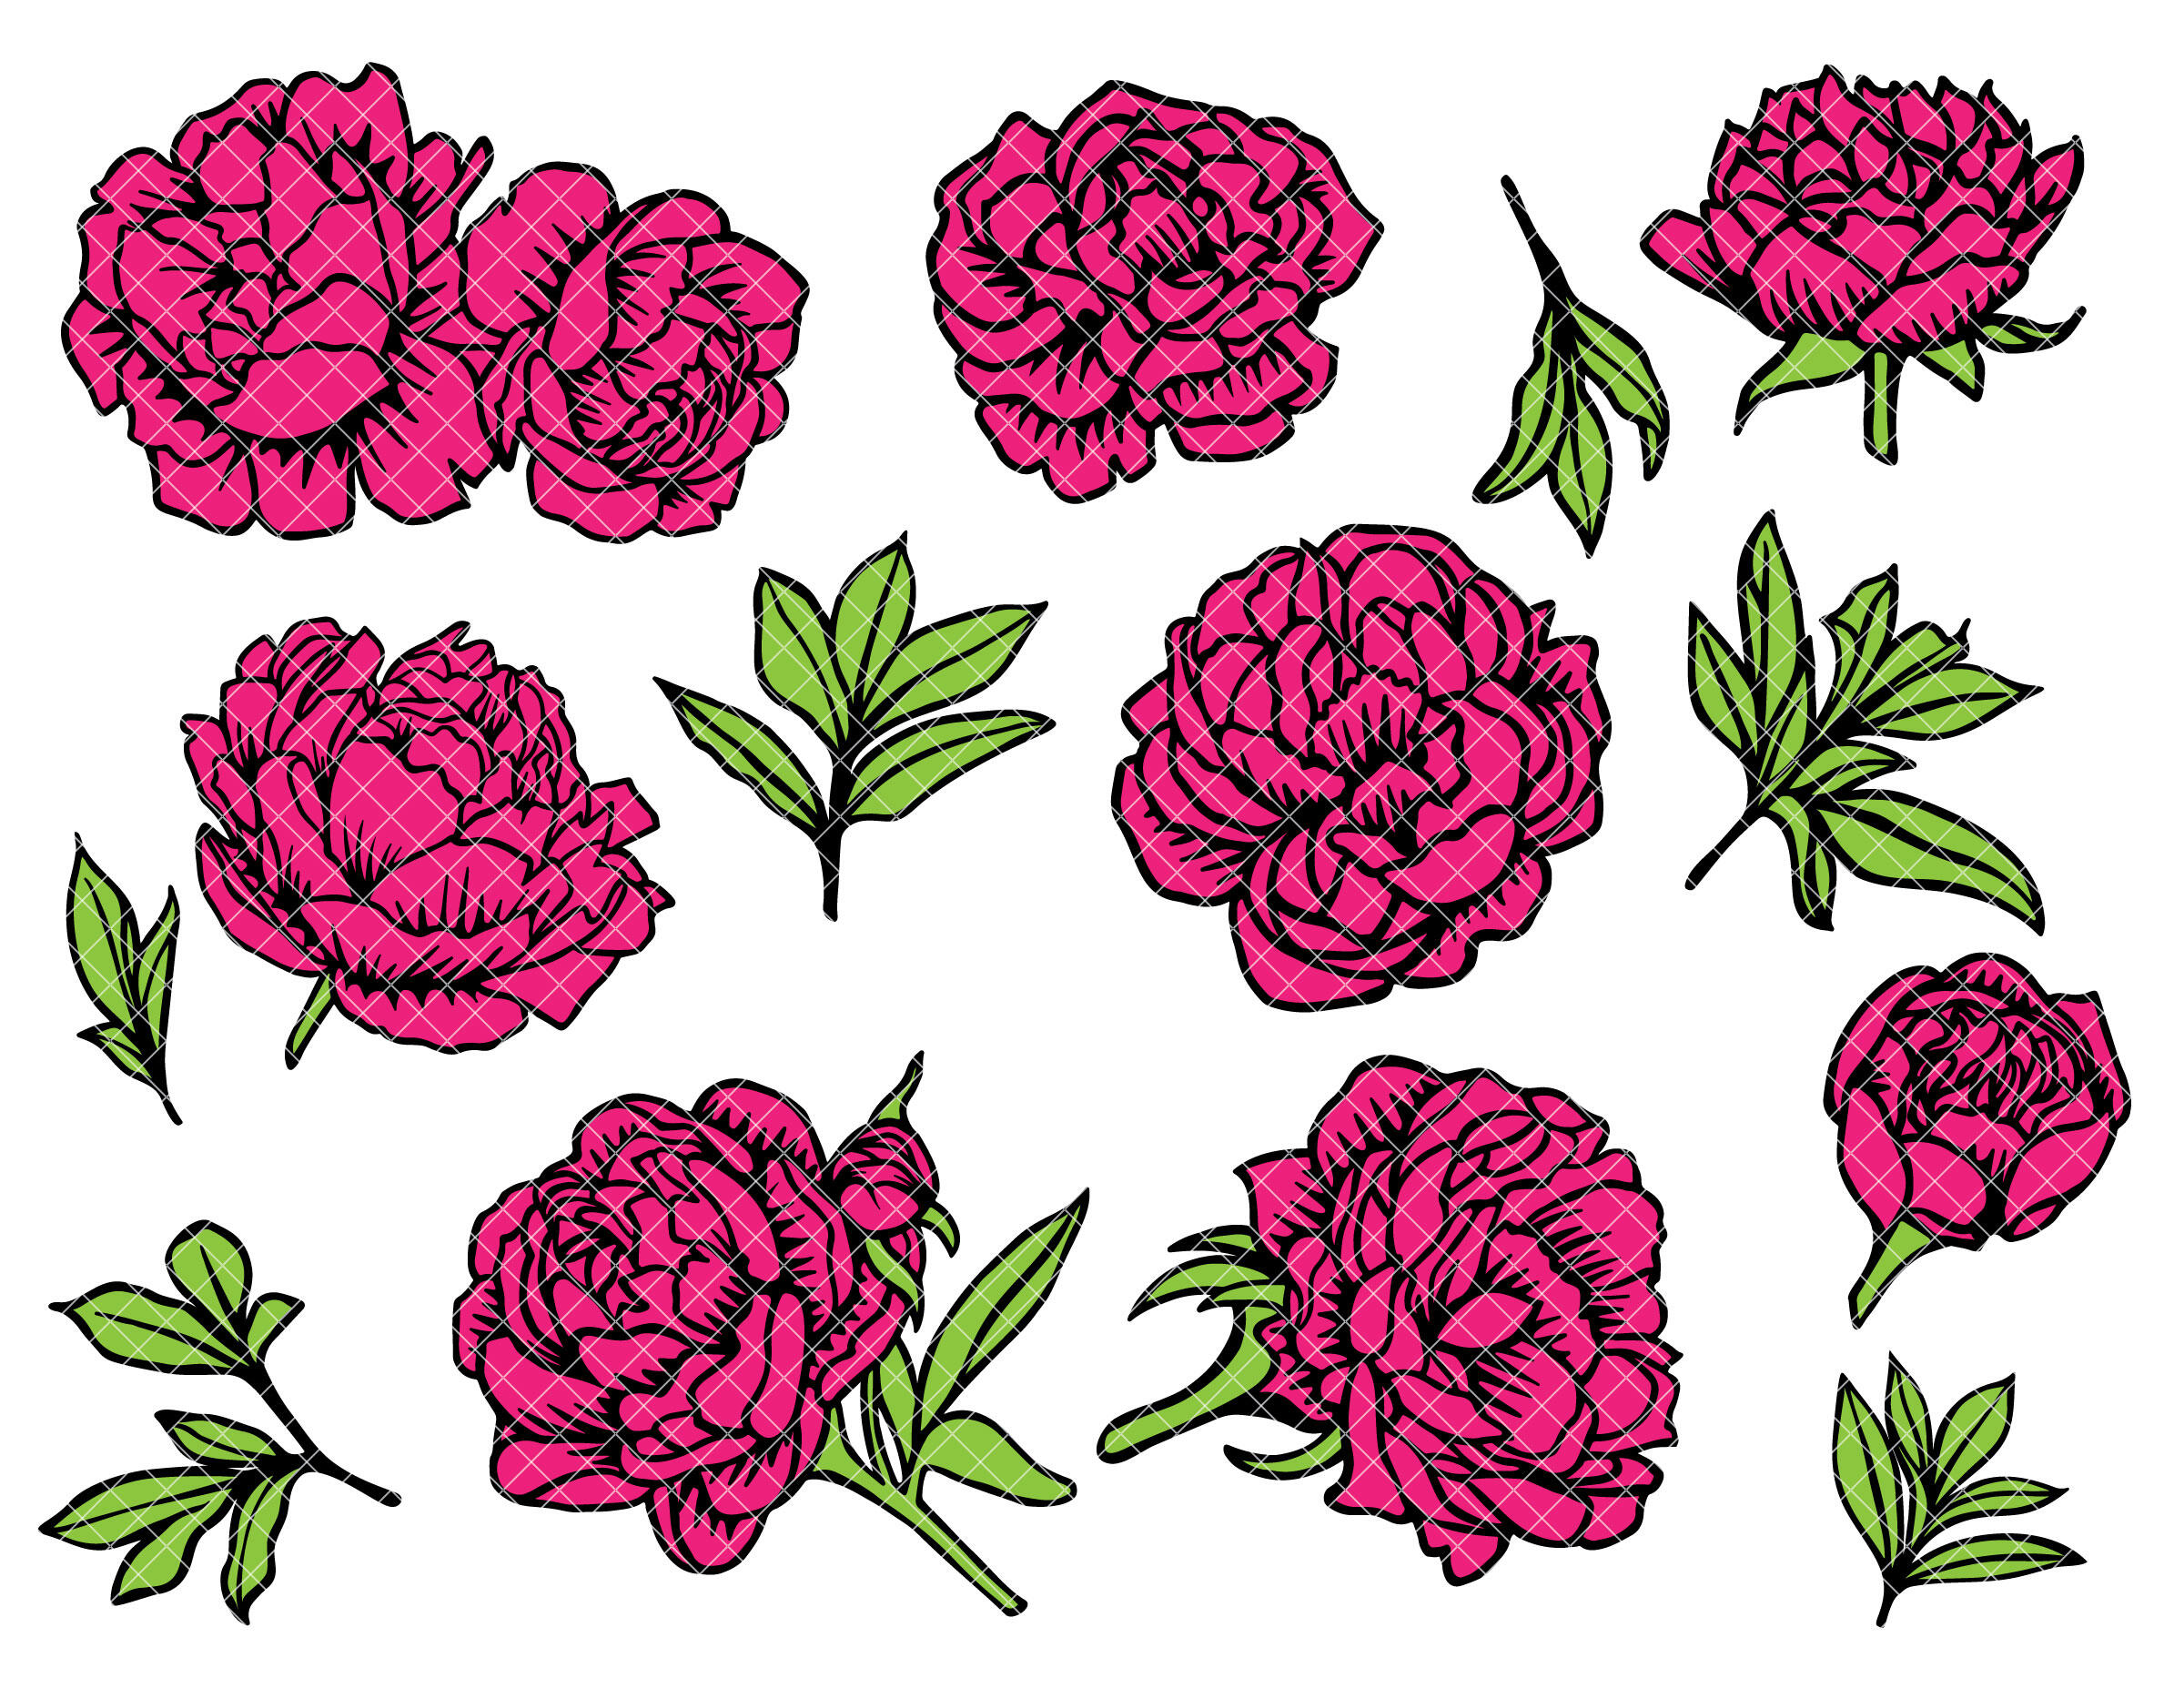 Download Handmade Supplies Clip Art Image Files Peonies Svg Layered Floral Svg Bundle Peony Vector Wedding Peonies Cut File For Cricut Sihouette Flowers For Vinyl Peony Clipart